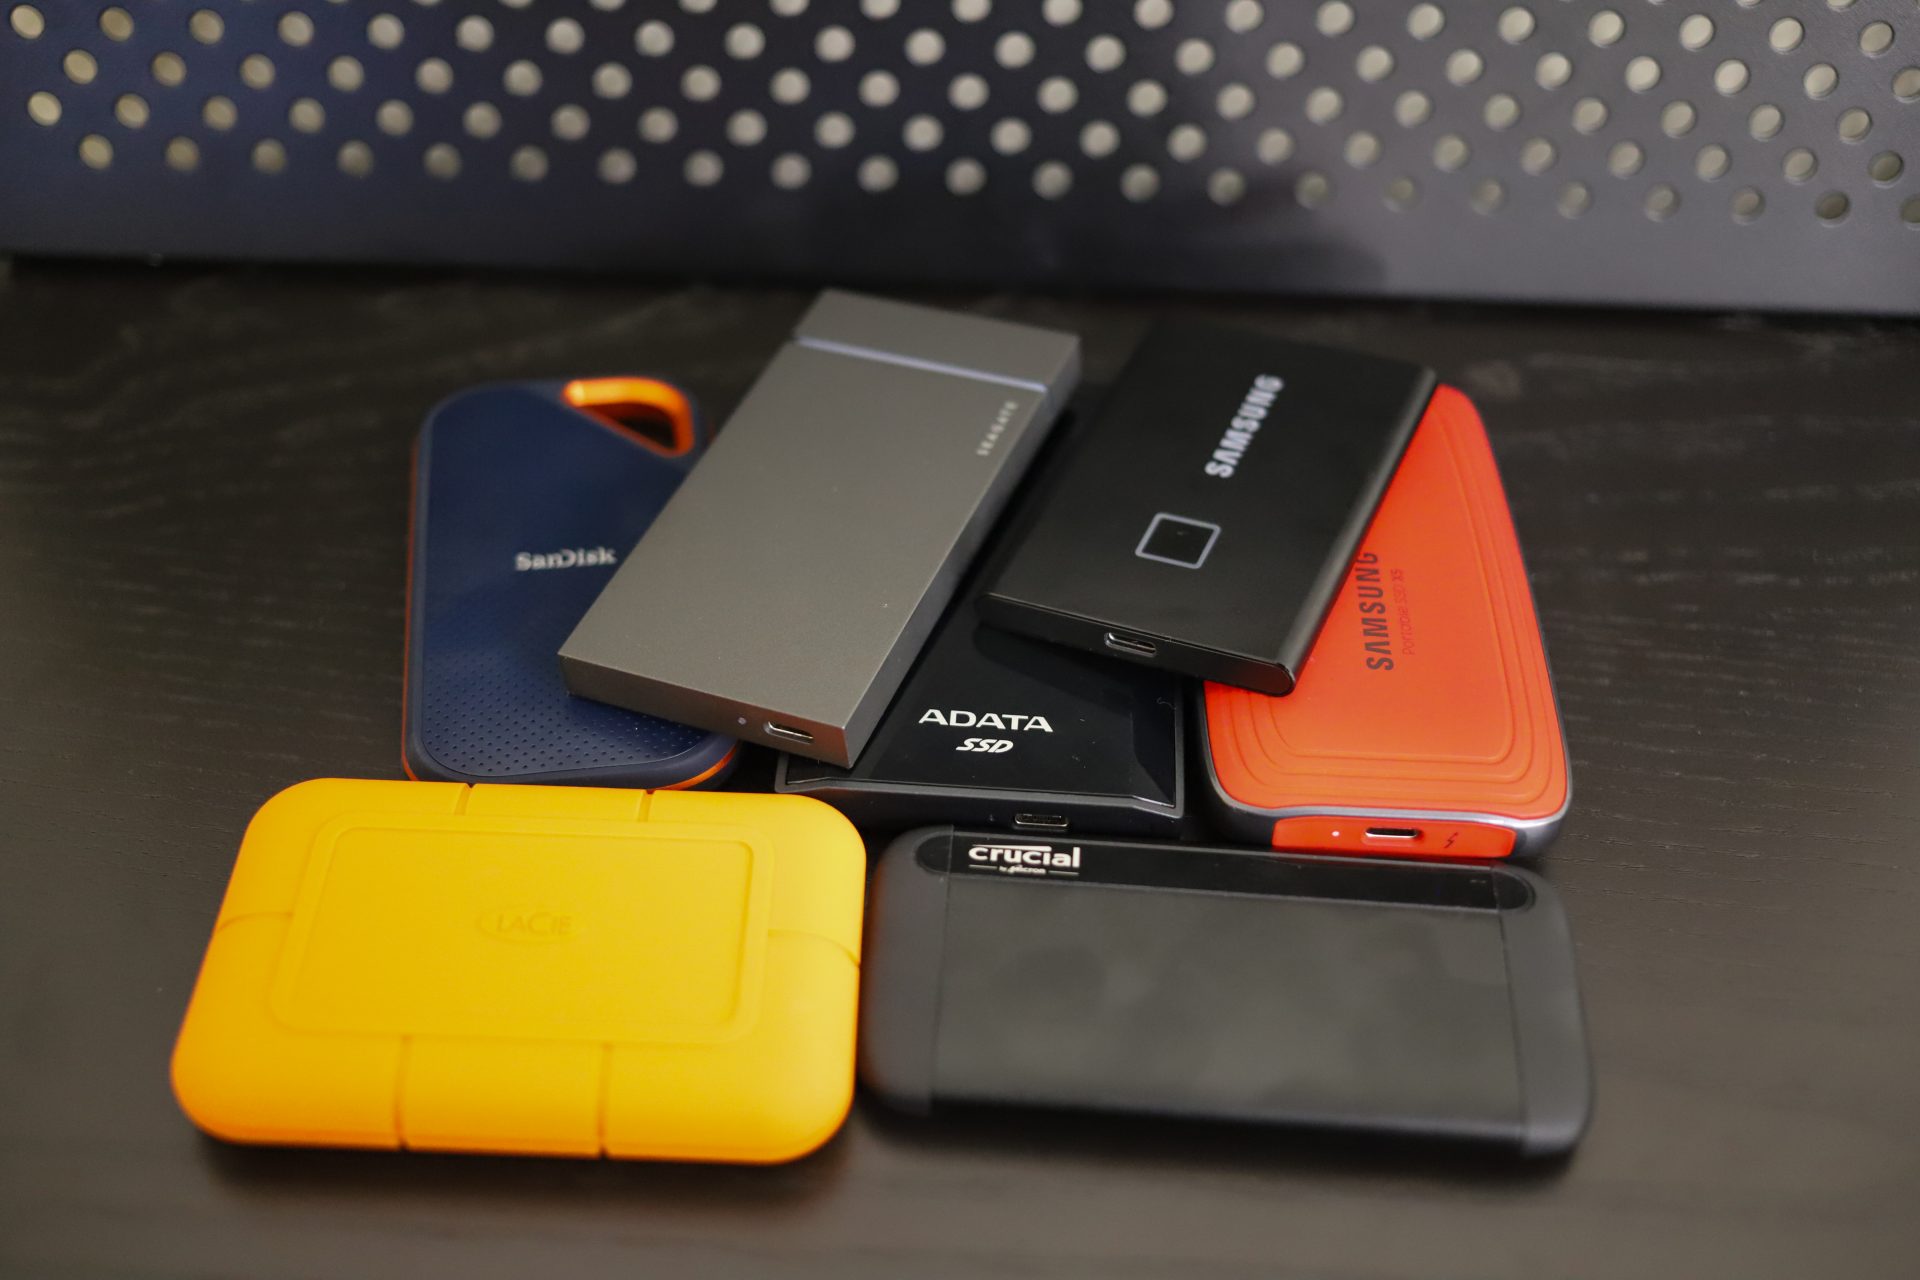 The Best Portable SSD for Sustained Performance